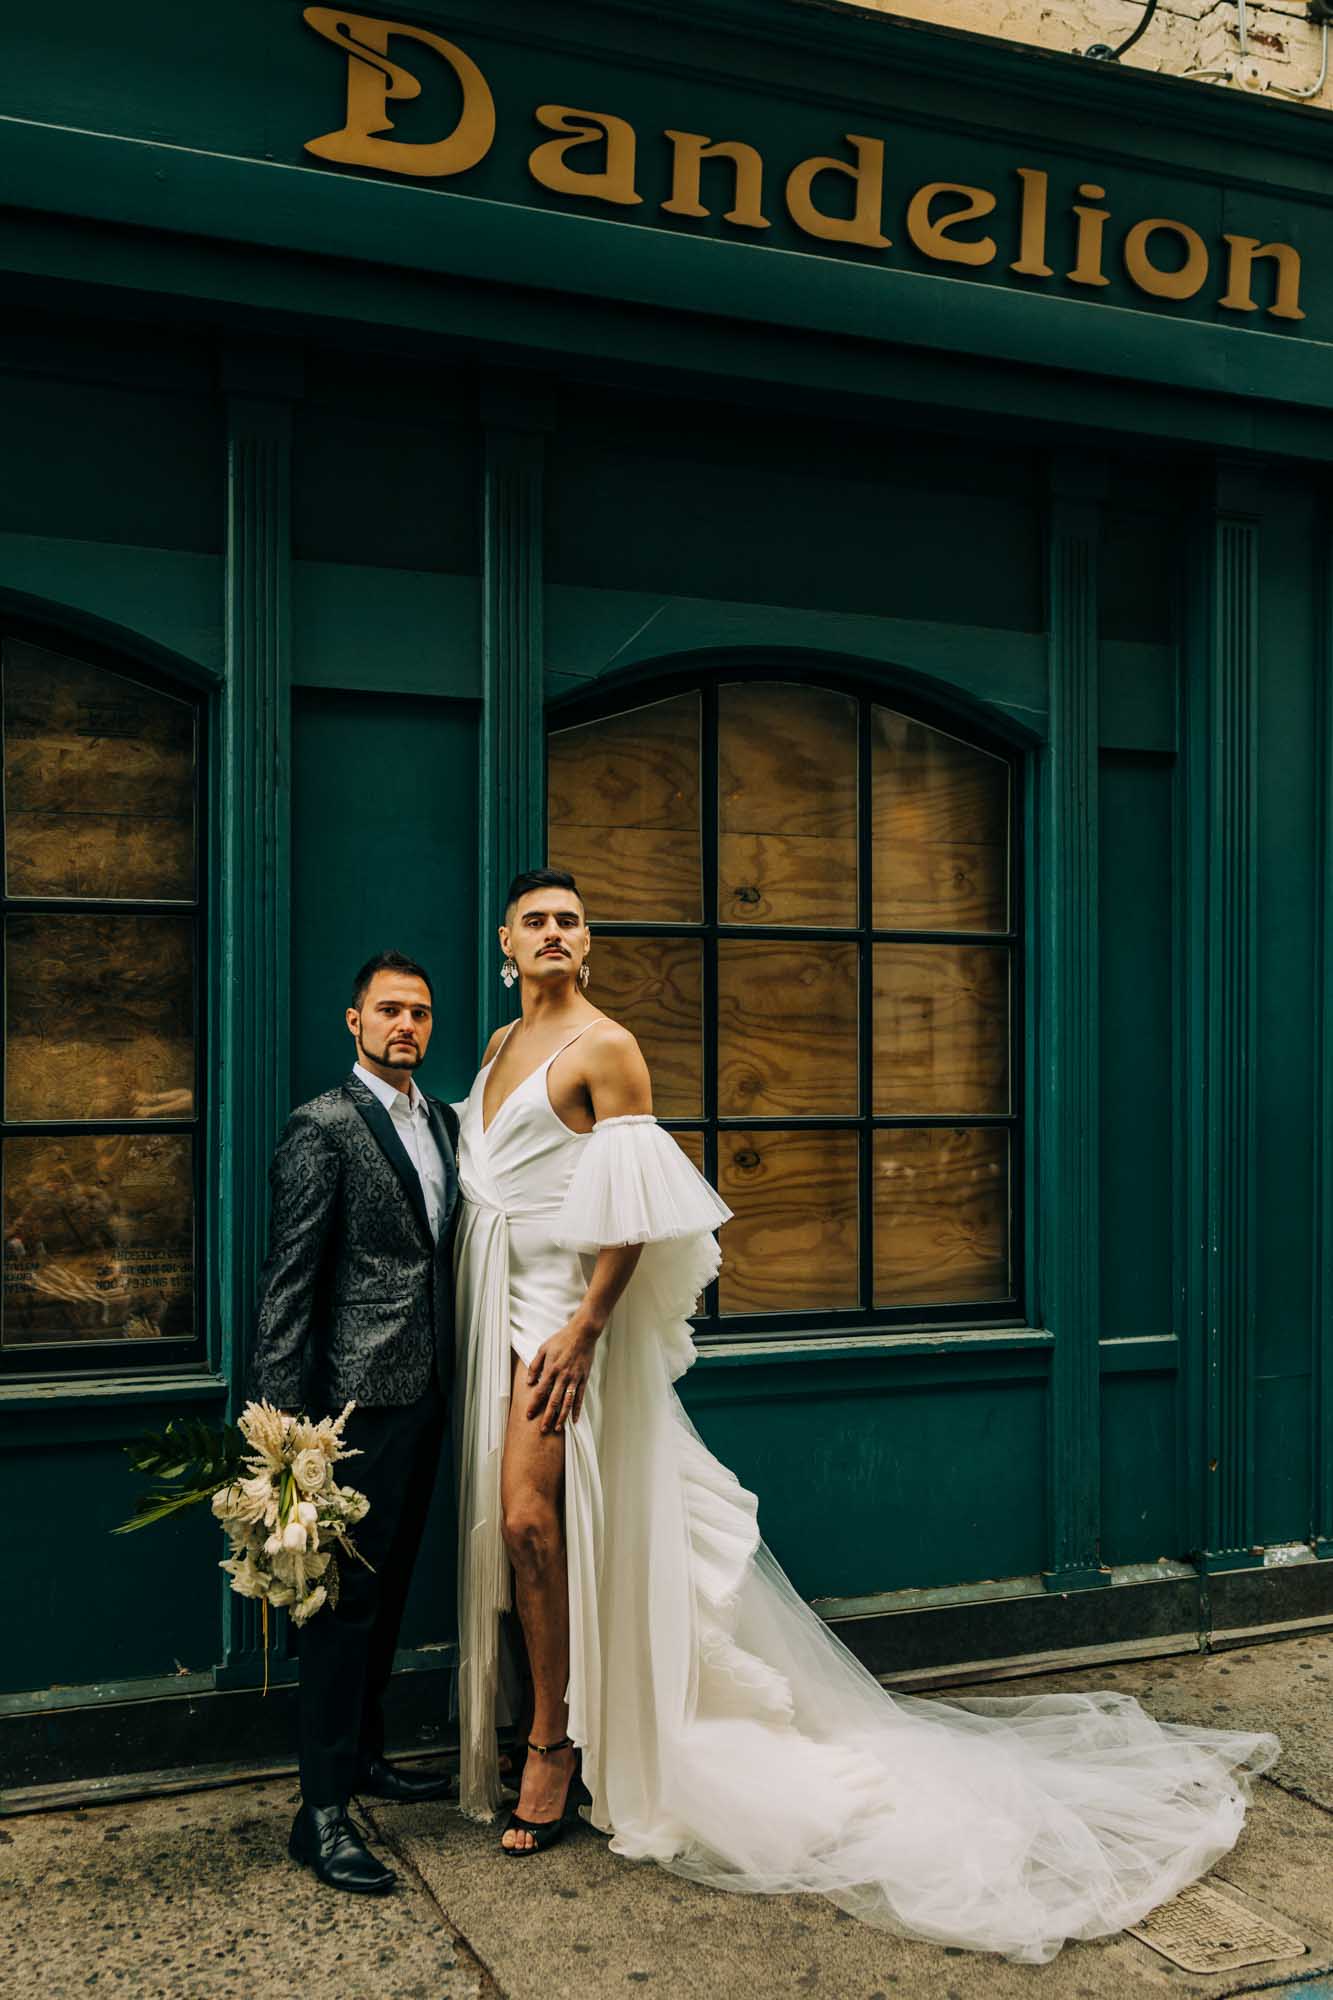  Elegance, style and gender fluidity at this styled shoot inside a speakeasy | Rebecca Stone Photography | Featured on Equally Wed, the leading LGBTQ+ wedding magazine 